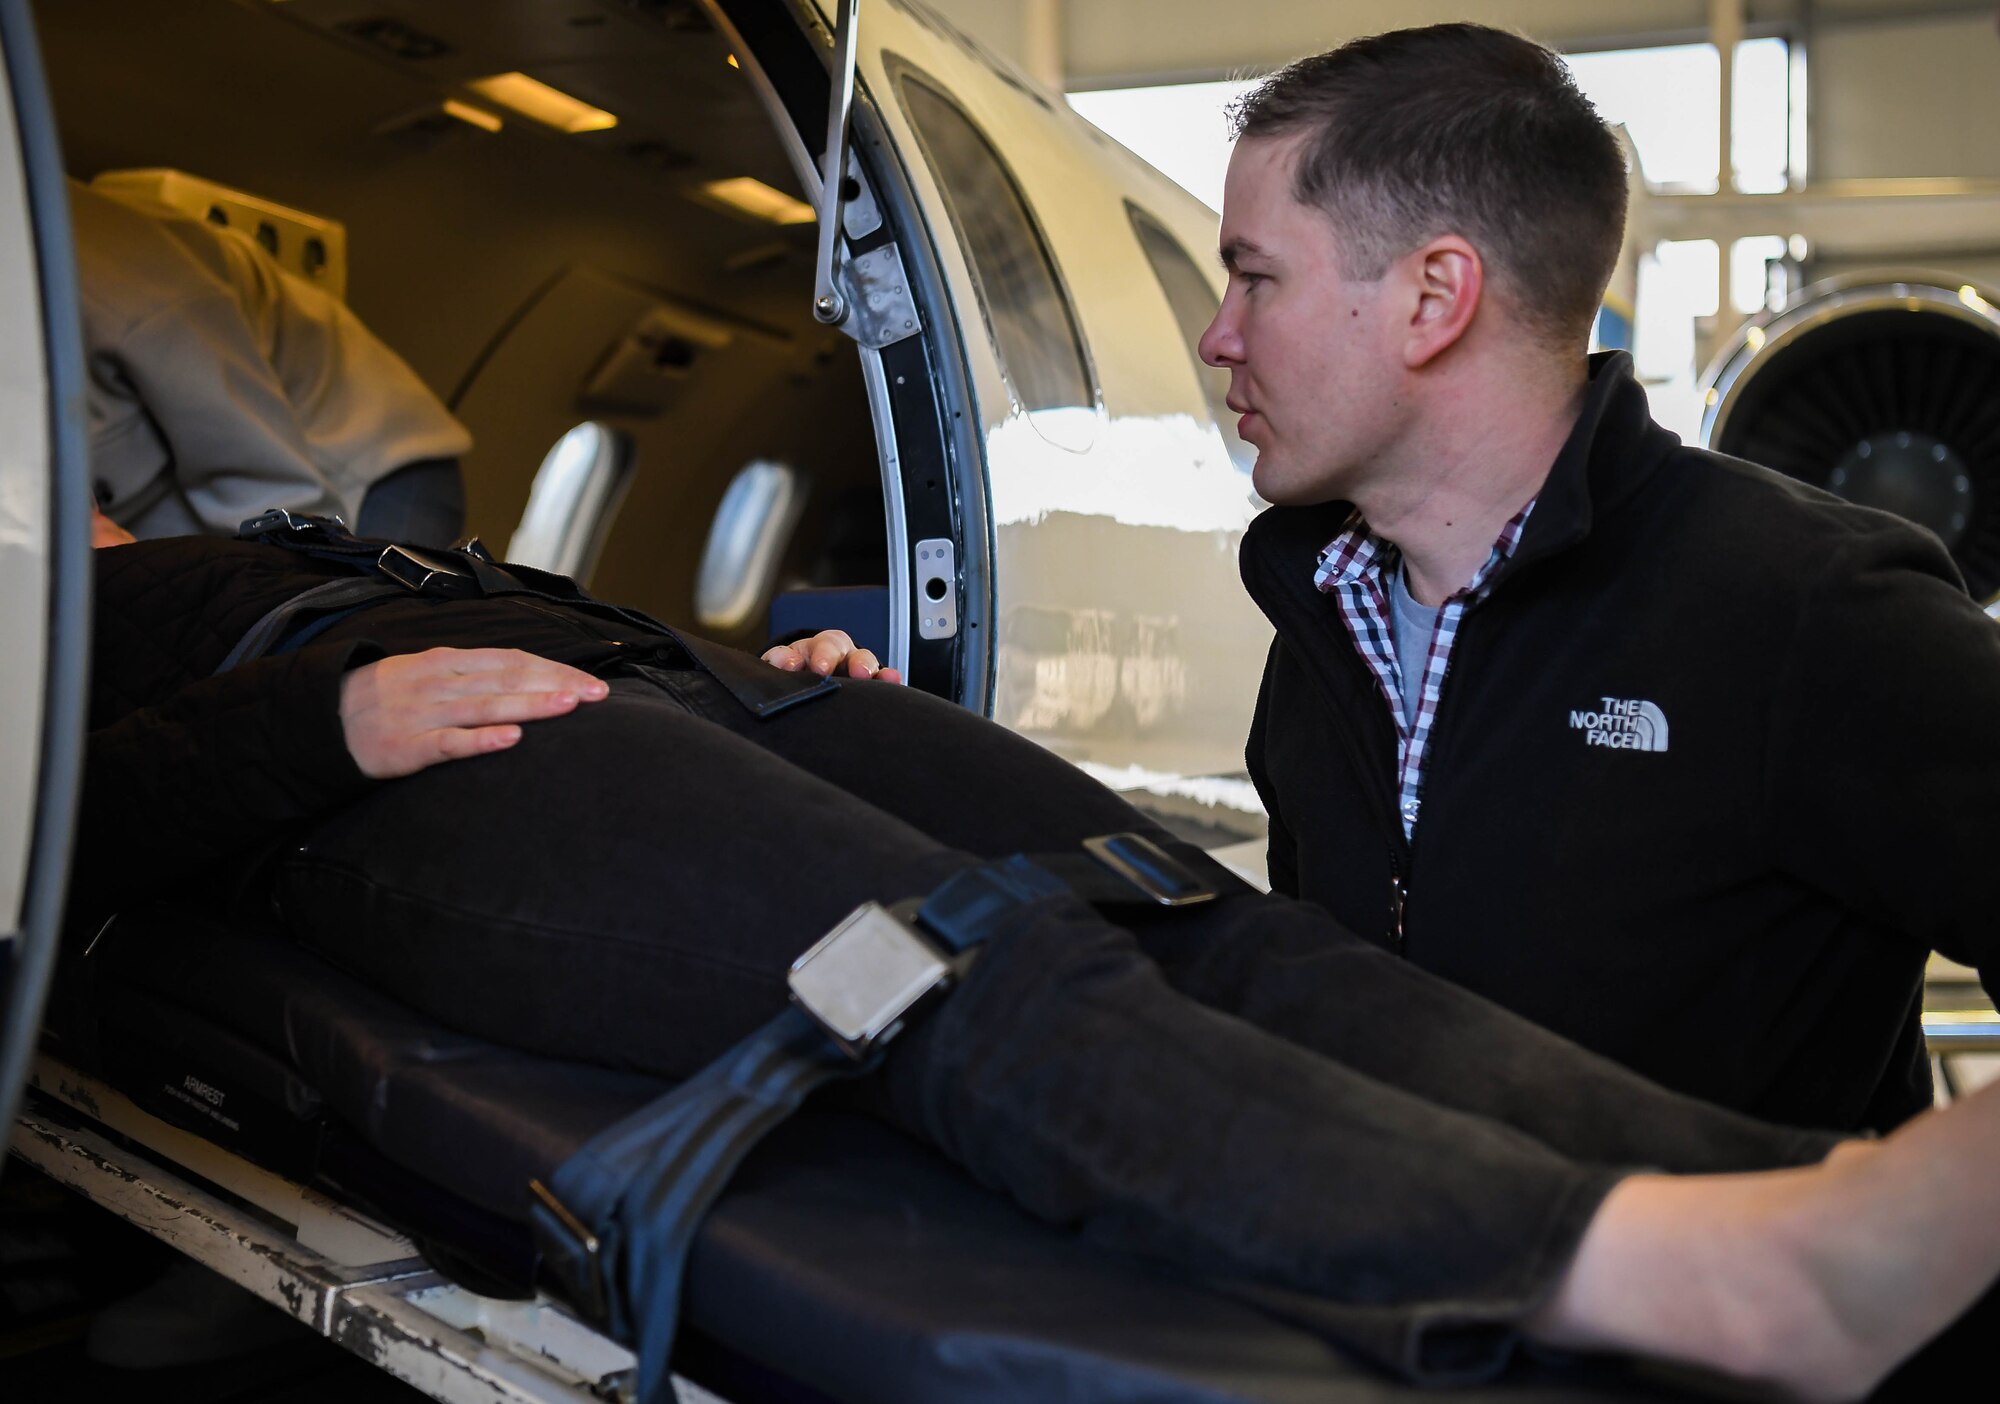 U.S. Air Force Capt. Adam Olligschlager, 86th Airlift Wing plans and programs action officer, loads a simulated litter patient onto a C-21 aircraft for aeromedical evacuation training at Ramstein Air Base, Germany, March 11, 2022. Olligschlager performs training exercises such as this to keep up his skills and ensure that all nurses remember mission and clinical requirements for transferring patients via aircraft. When Olligschlager isn’t working as an action officer, he assumes regular duties as a flight nurse evaluator at the 86th Aeromedical Evacuation Squadron. (U.S. Air Force photo by Airman 1st Class Jared Lovett)